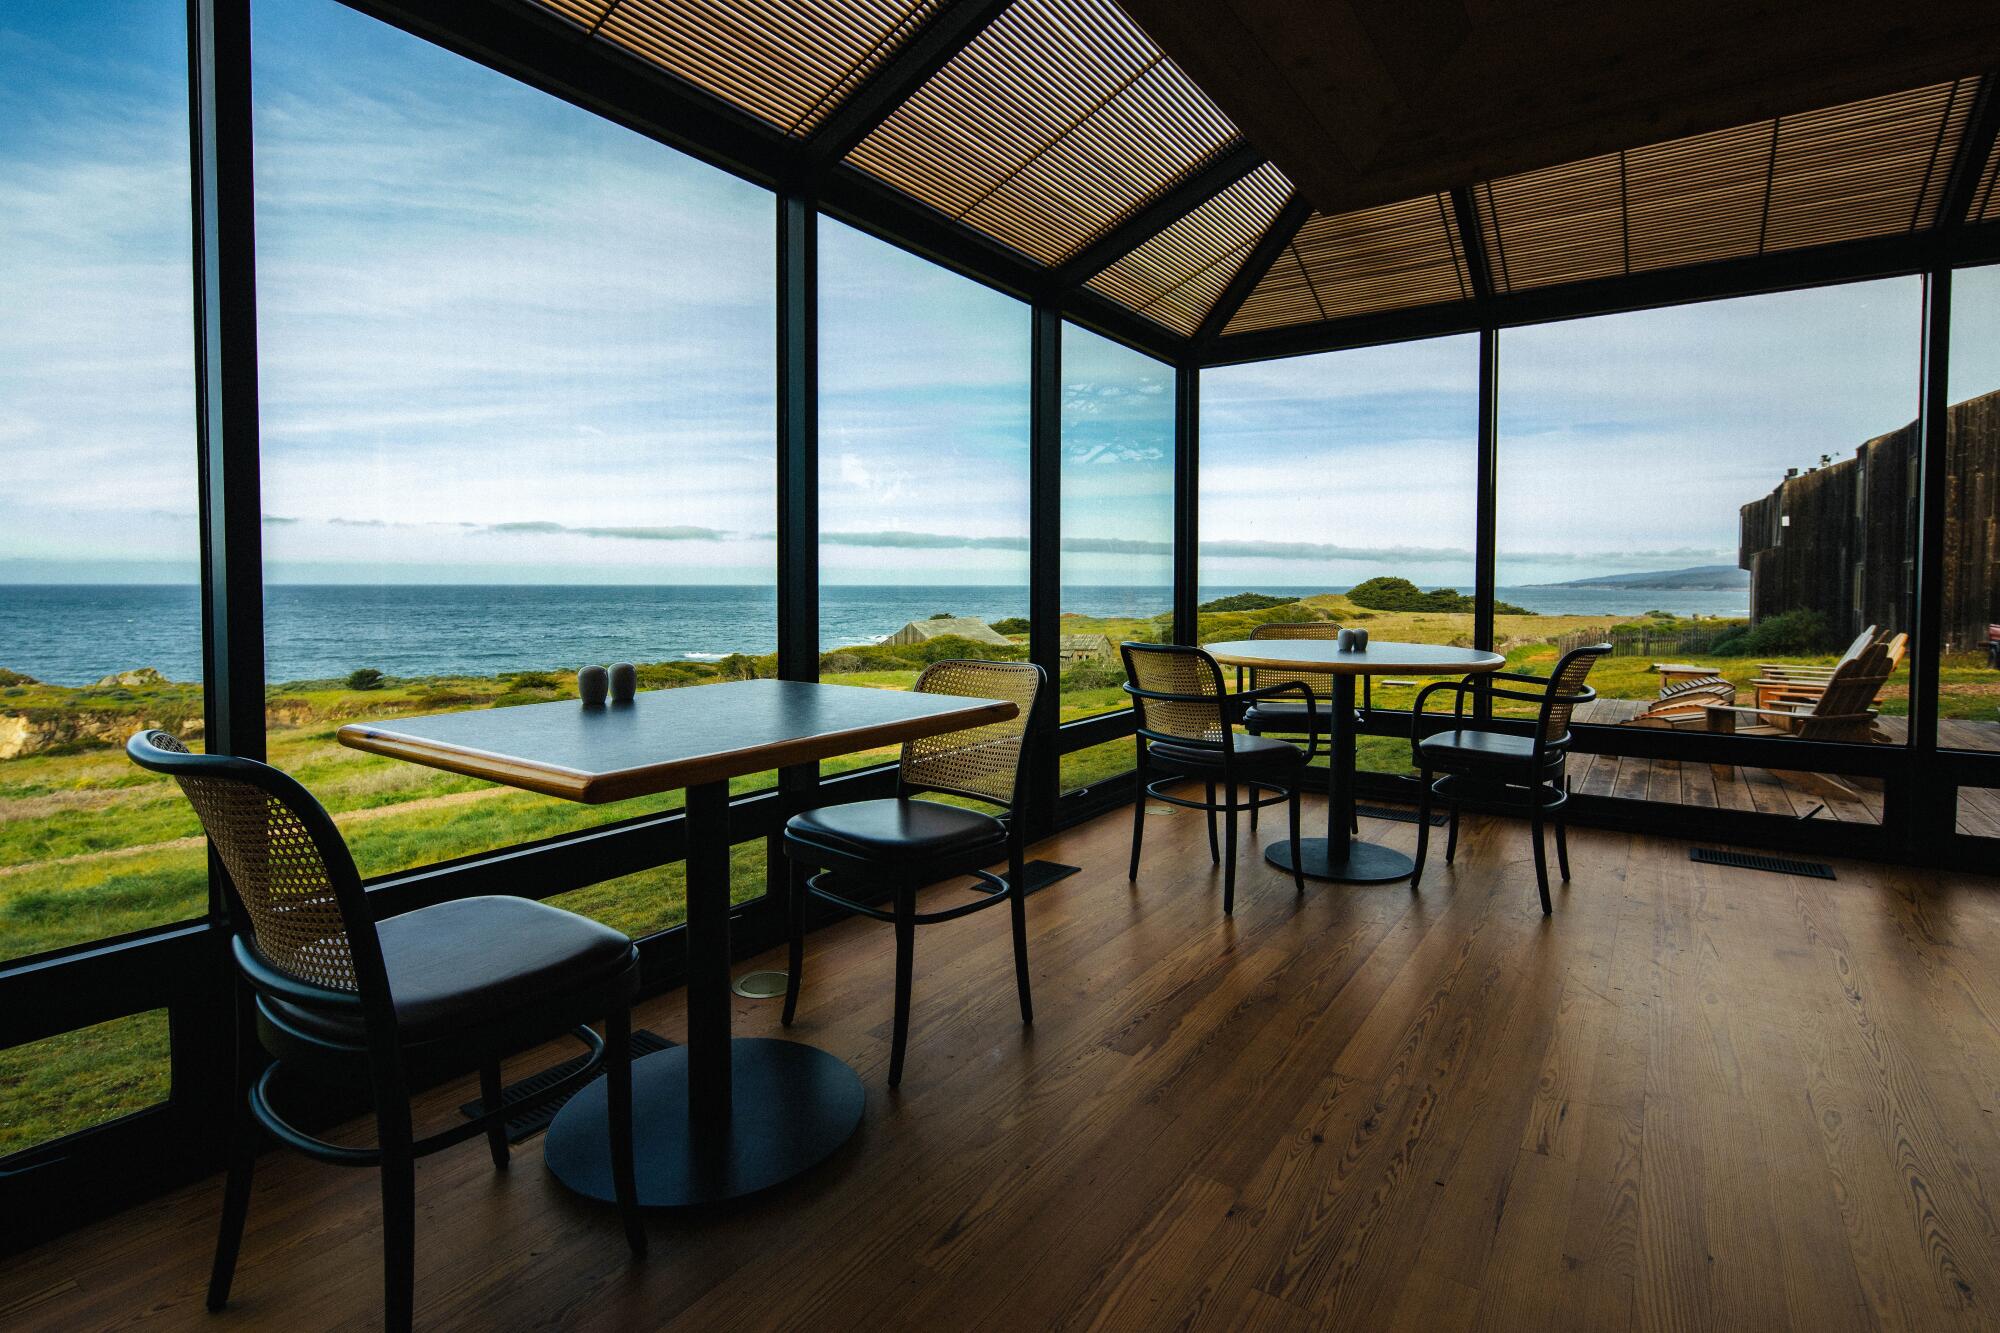 A lounge/dining area with large windows that look out onto the coast.